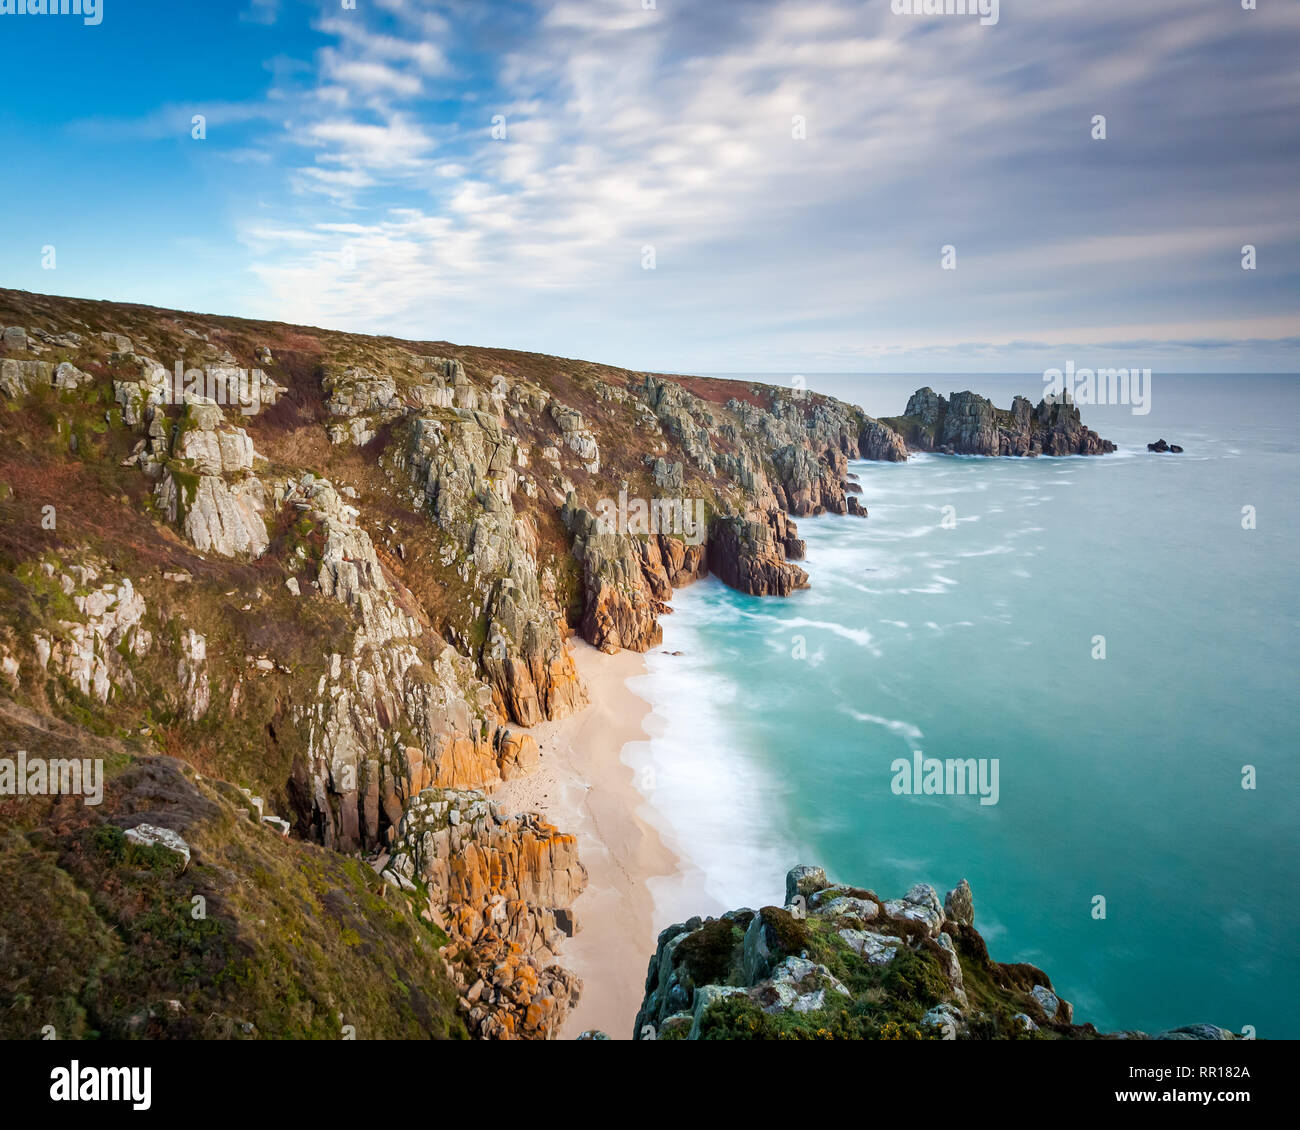 Overlooking Pedn Vounder Beach from Treen Cliffs near Porthcurno  Cornwall England UK Europe Stock Photo